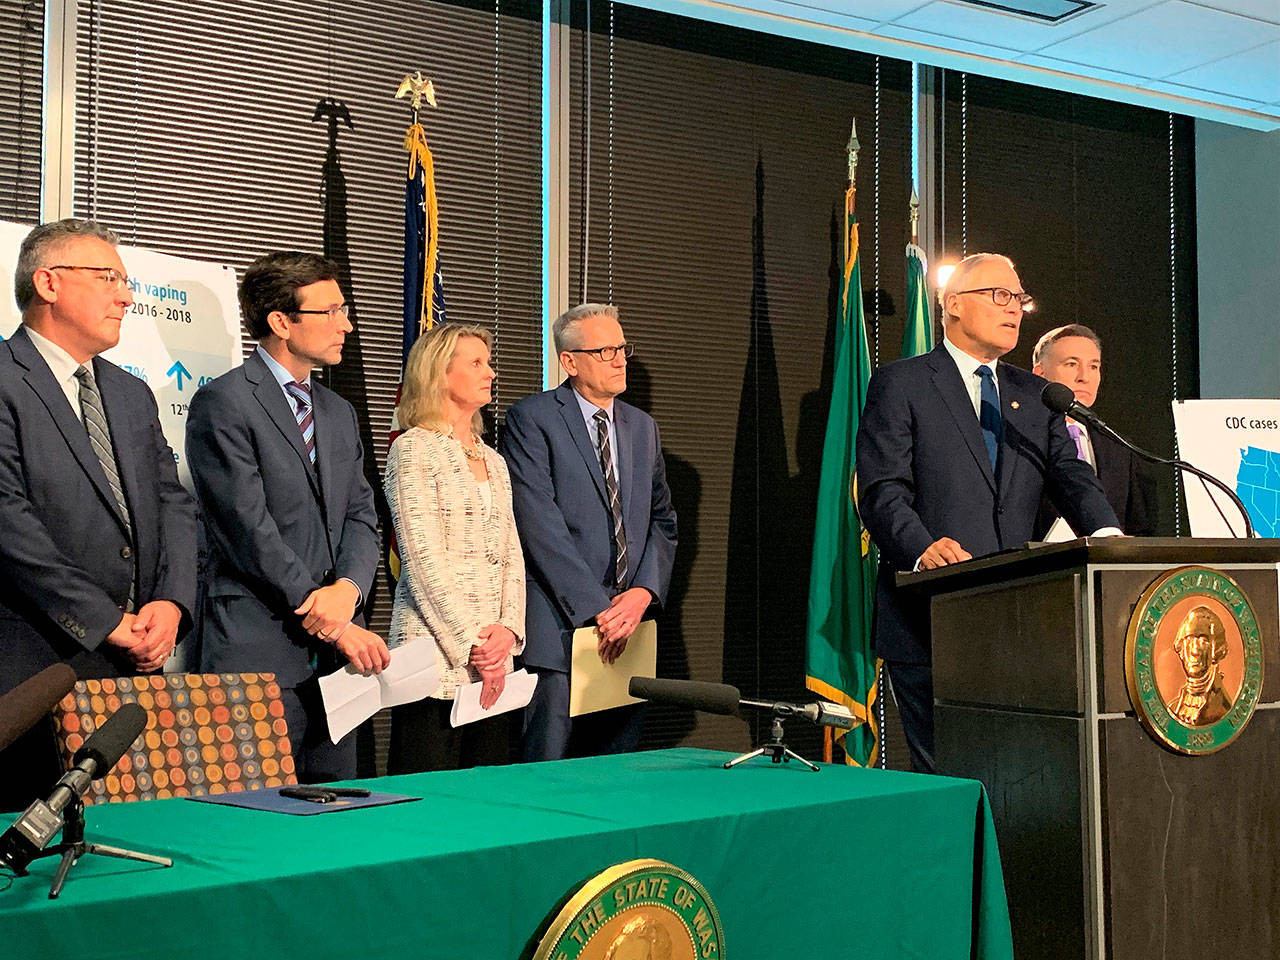 From left to right: Liquor and Cannabis Board Director Rick Garza, Attorney General Bob Ferguson, Sen. Patty Kuderer, Washington State Dept. of Health Secretary John Wiesman and Gov. Jay Inslee speak at a Seattle press conference Friday about changes to how the state regulates the vaping industry in light of a recent health crisis. COURTESY PHOTO, Office of the Governor